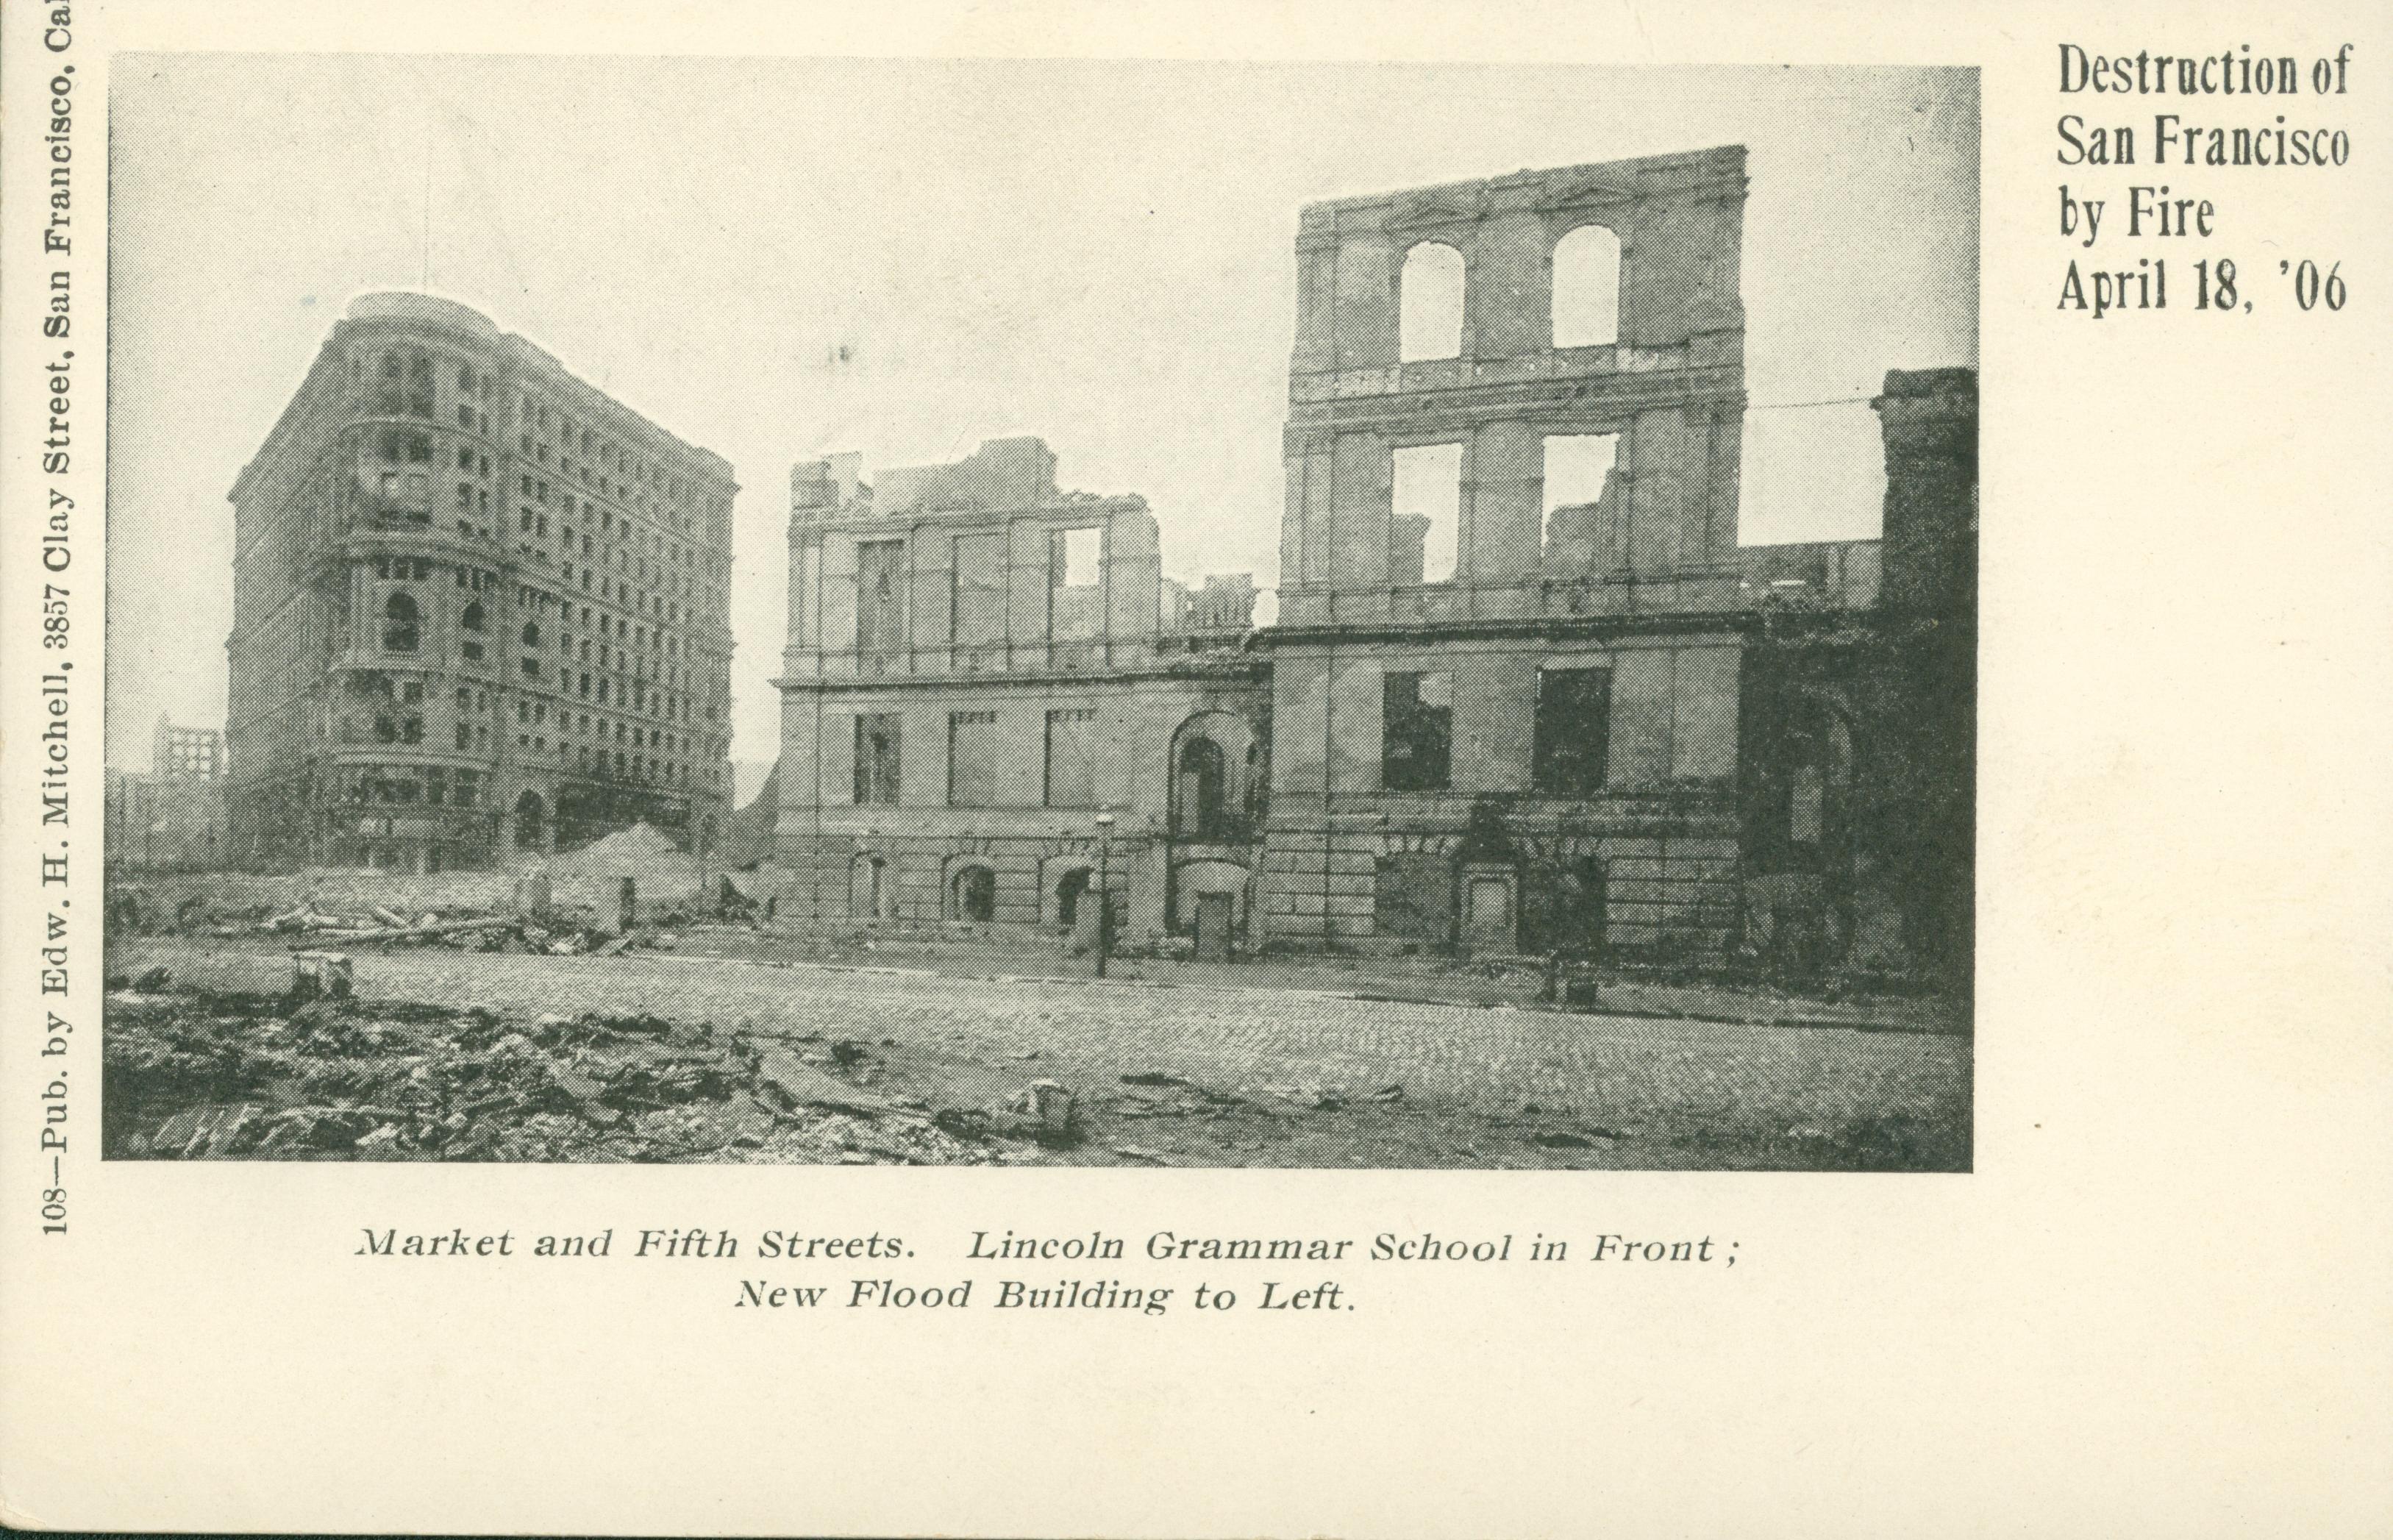 Shows the Flood Building and Lincoln School after the earthquake